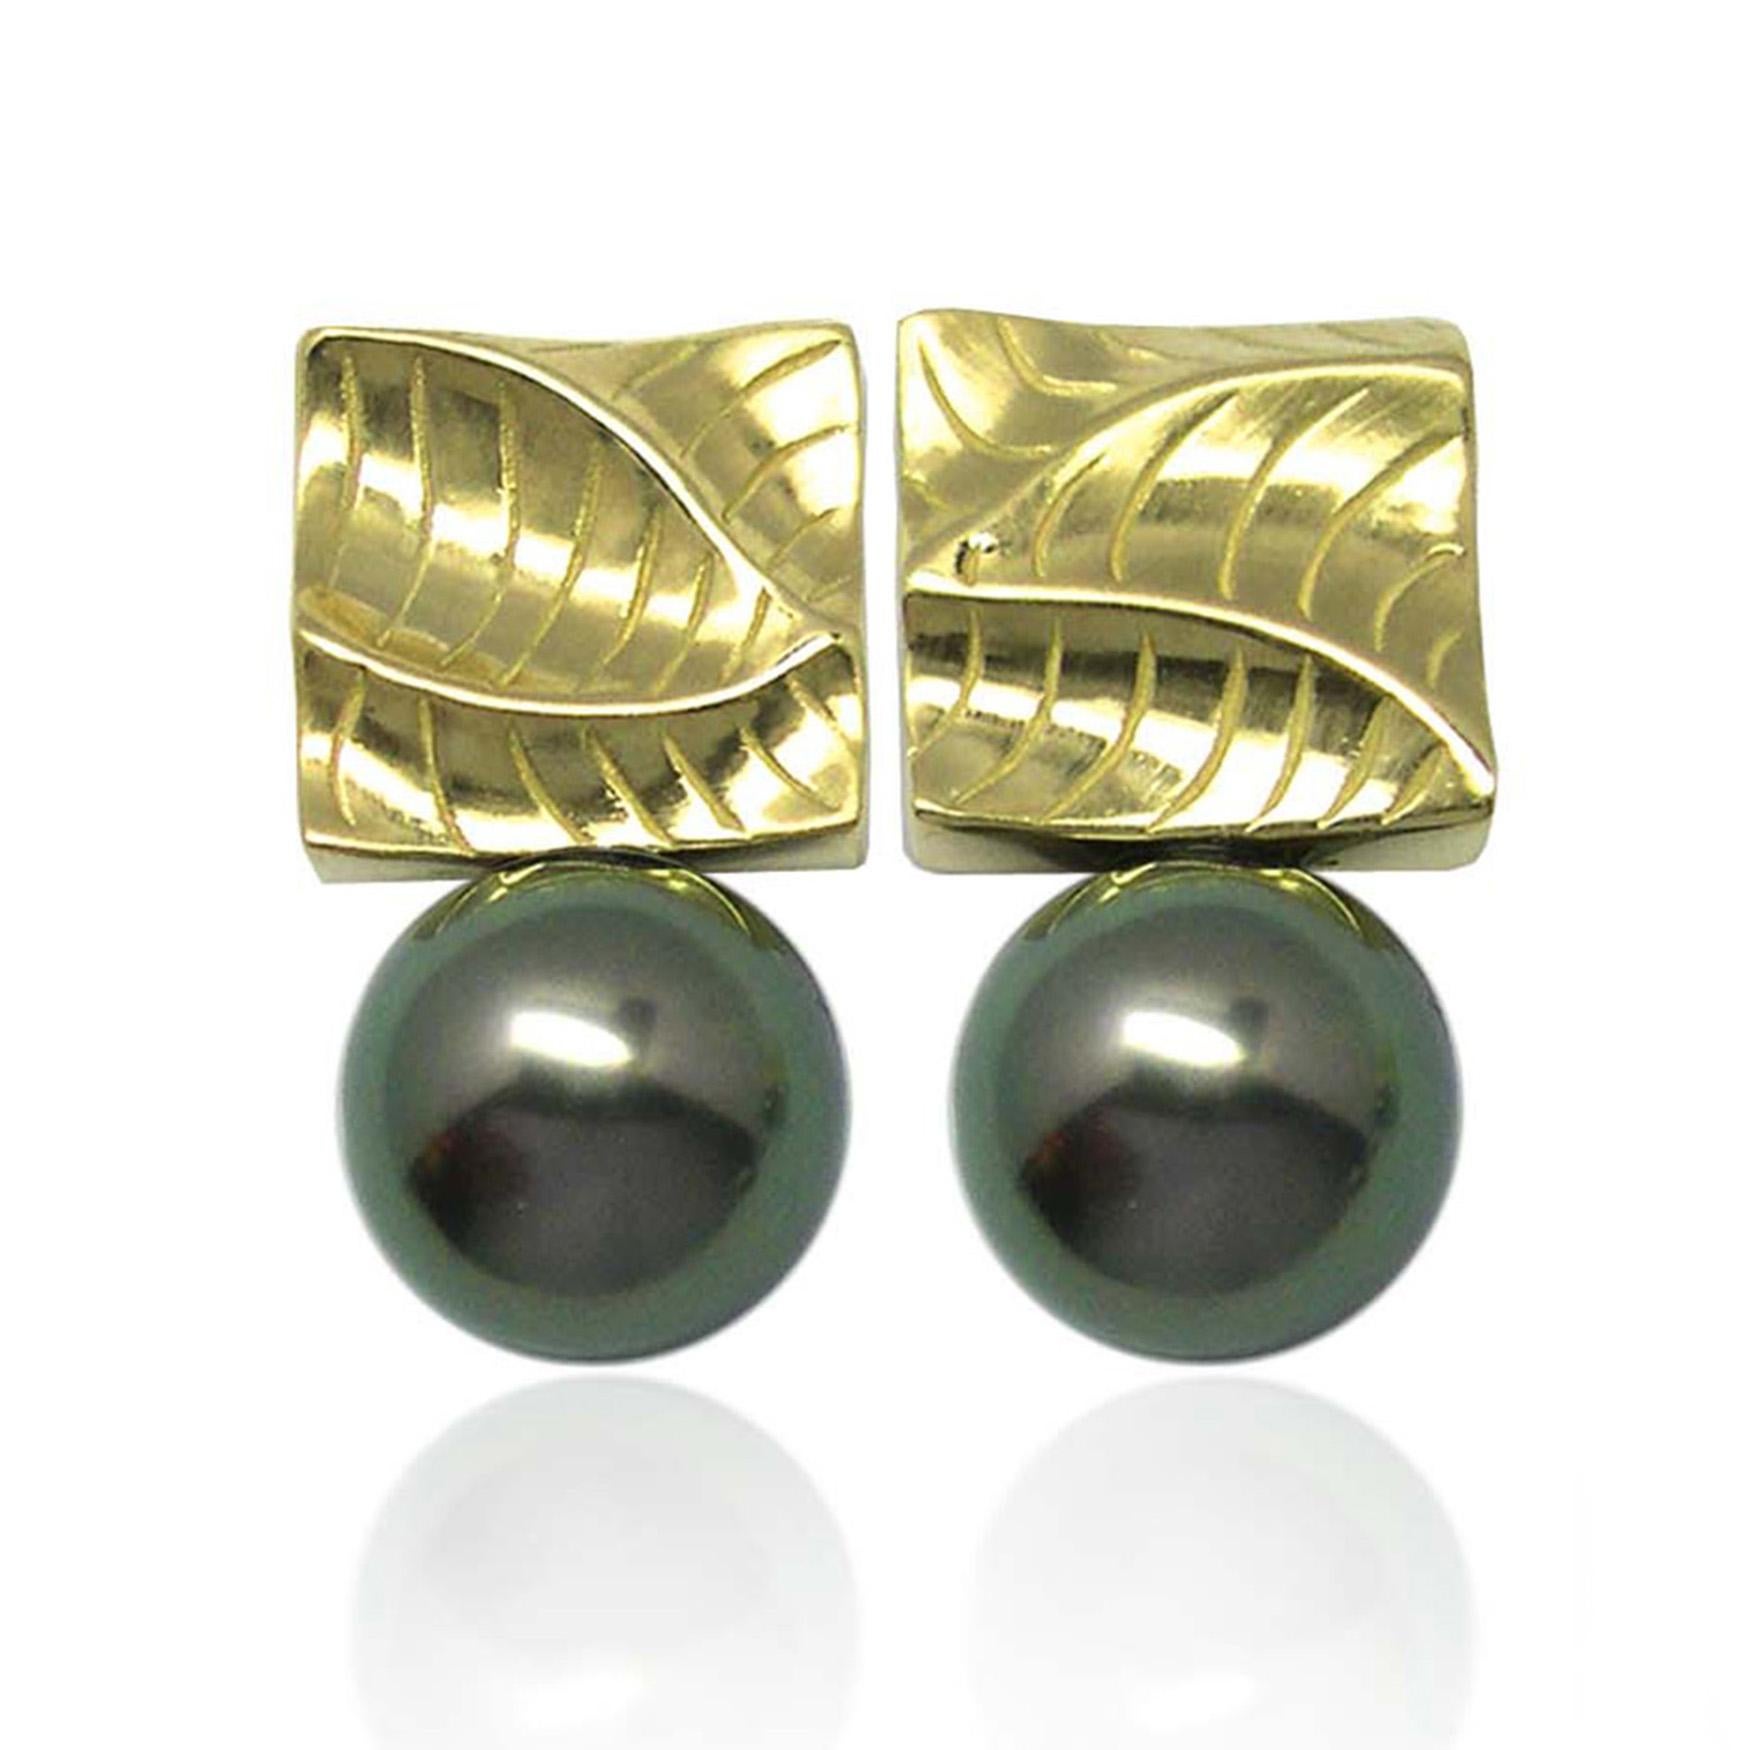 Keiko Mita’s Small Square Pearl Earrings are handmade from 18 Karat Yellow Gold. The contemporary earrings, which are 18 mm long and 10 mm wide, feature 8.5 mm Tahitian Pearls and the artist’s signature Dune texture. These unique earrings from her